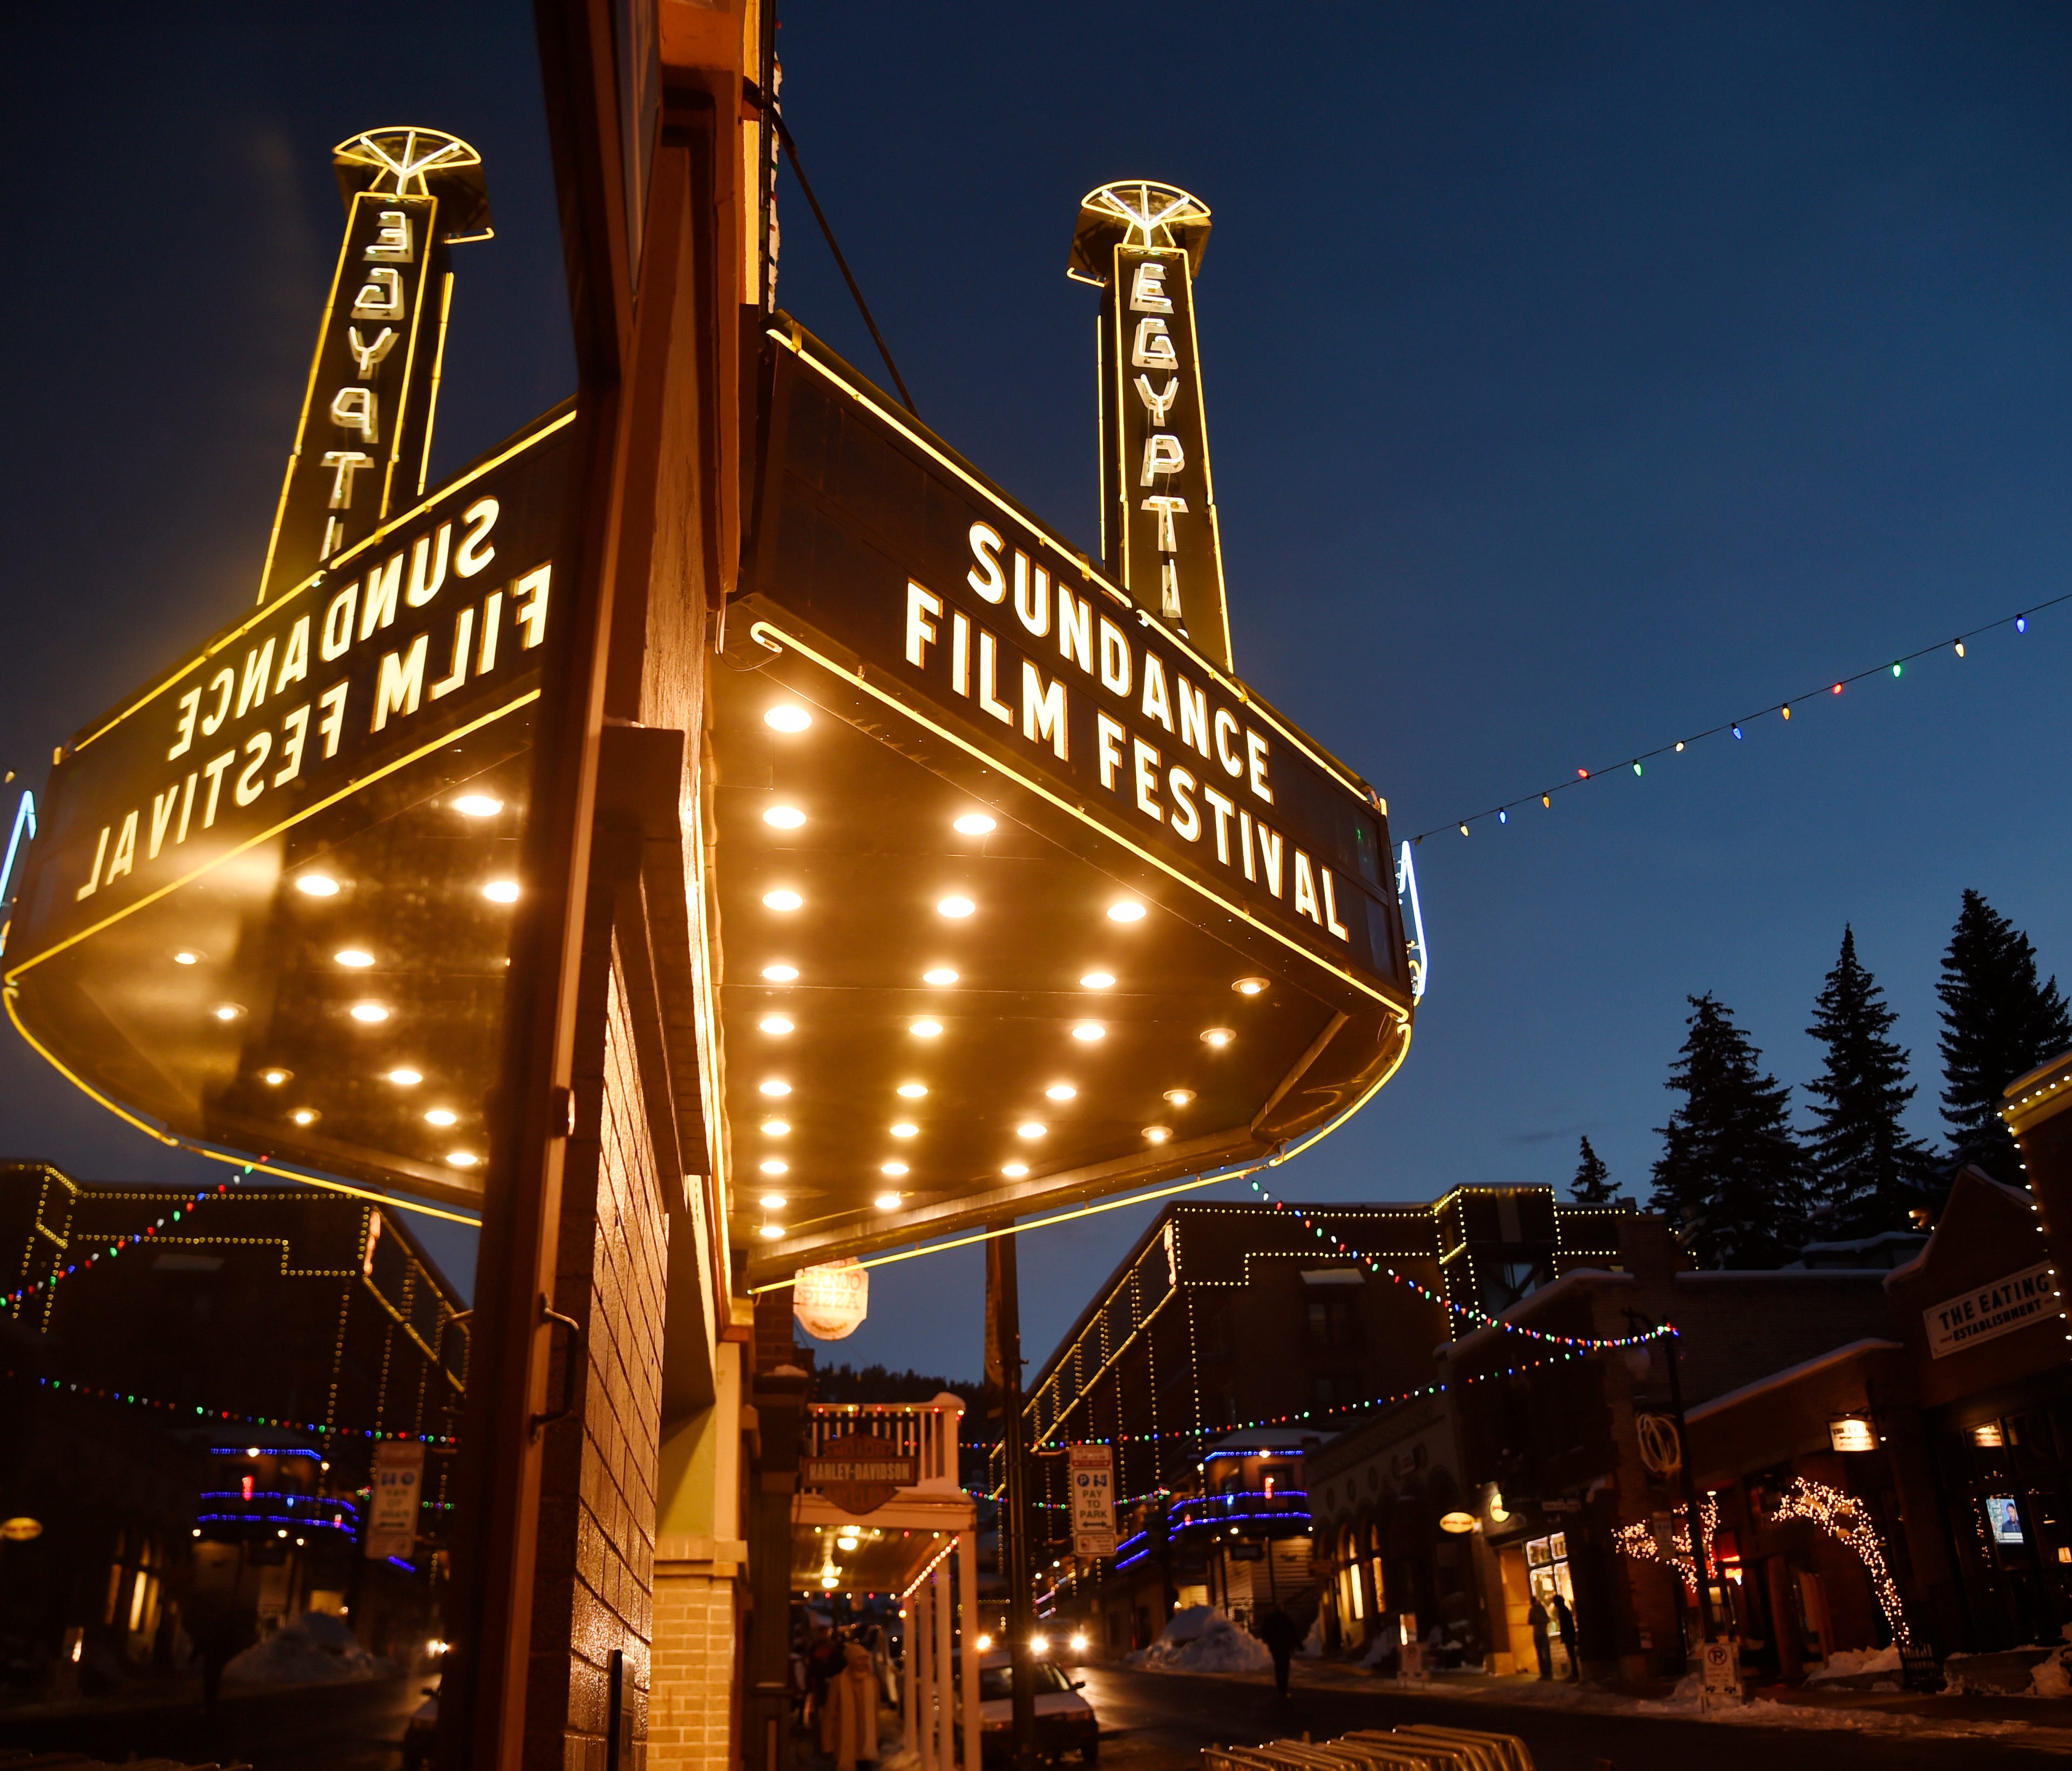 The Egyptian Theatre is pictured on the eve of the 2017 Sundance Film Festival in Park City, Utah.